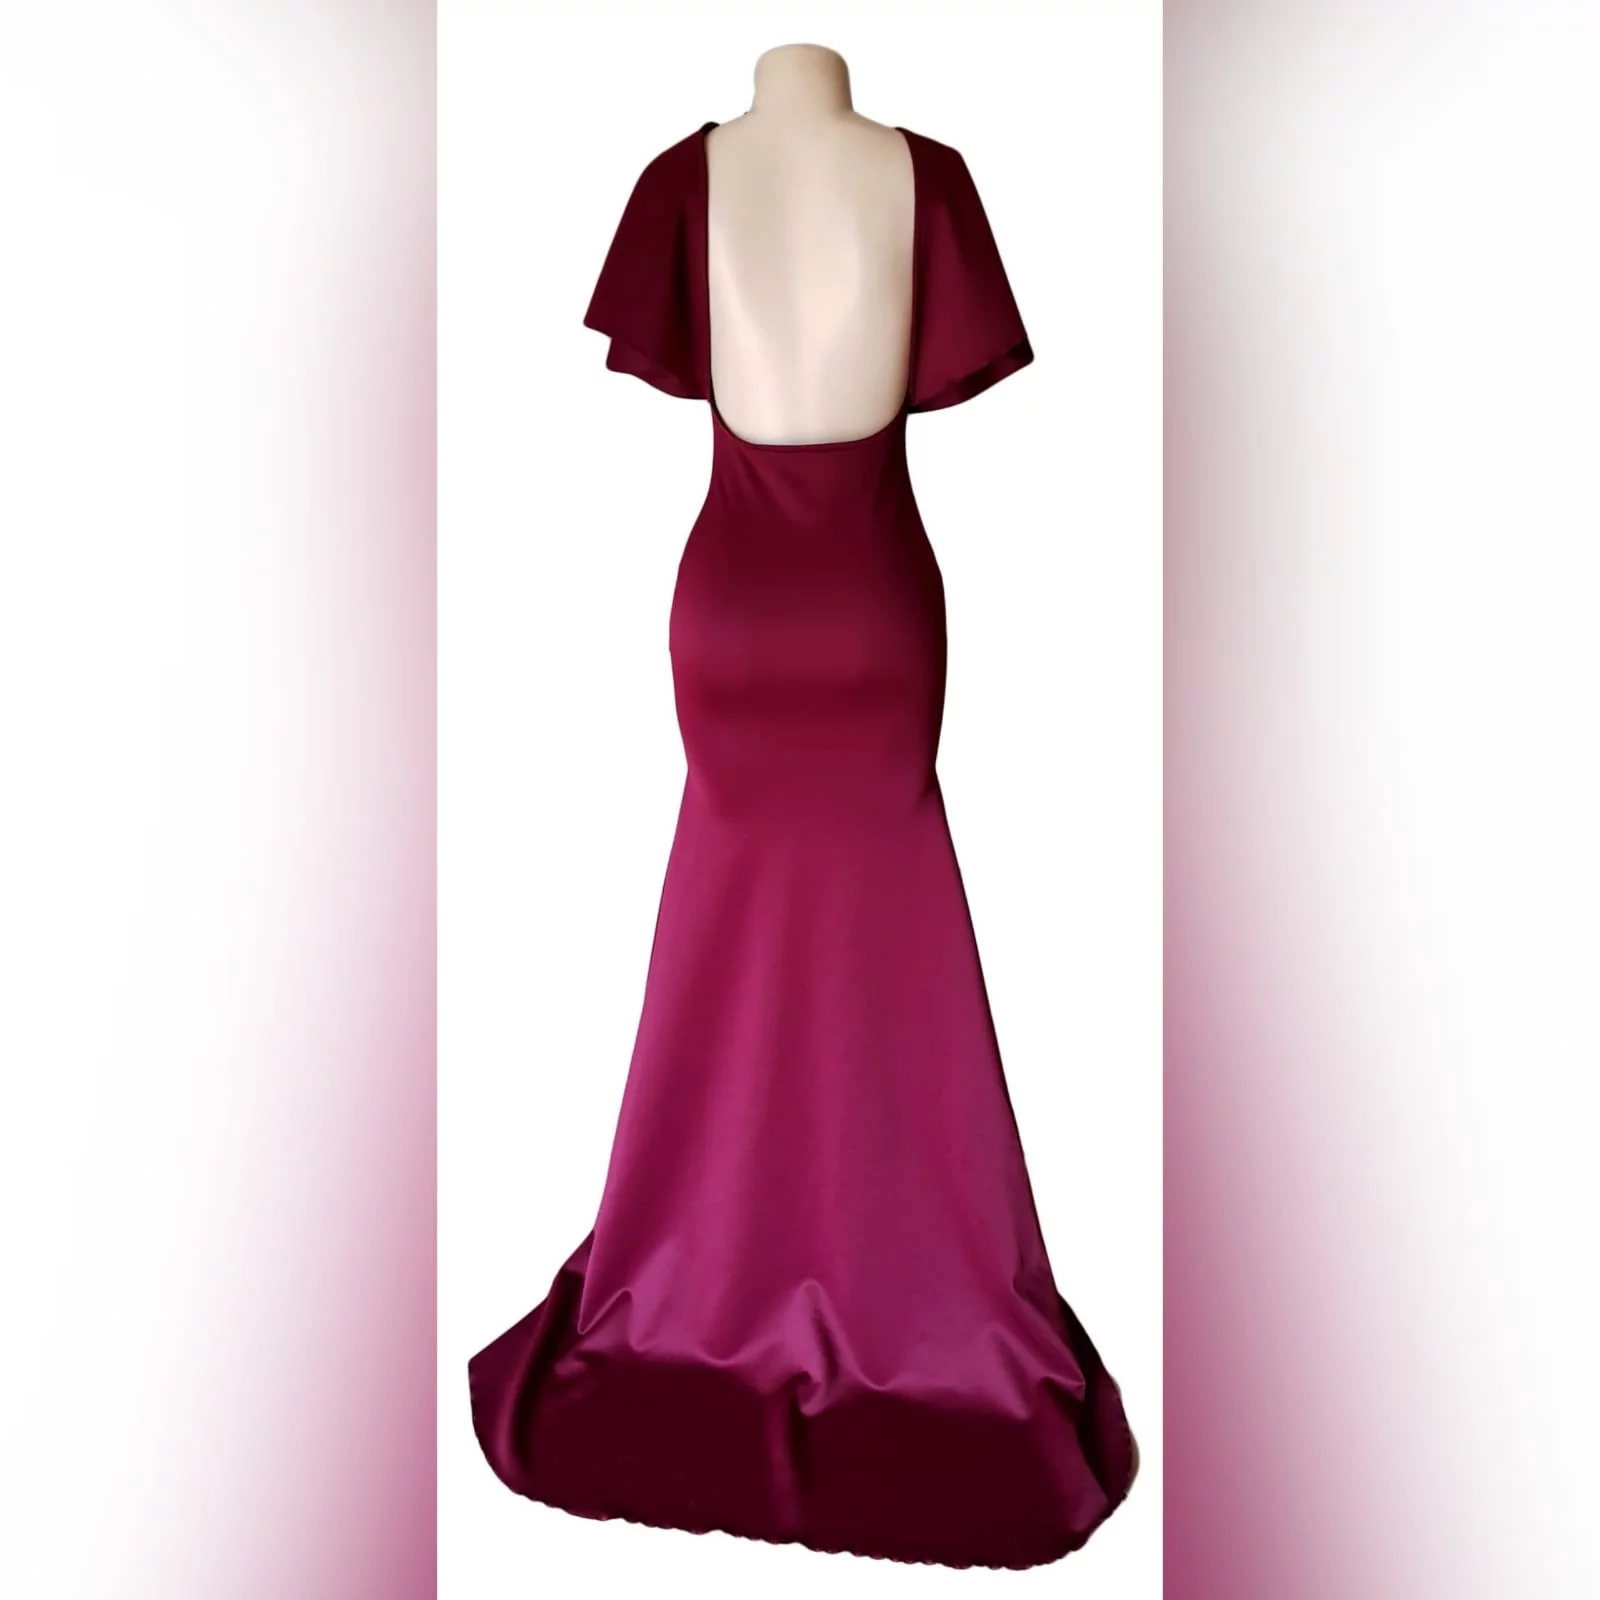 Burgundy plunging neckline soft mermaid matric dress 2 burgundy plunging neckline soft mermaid matric dress with flare short sleeves. Backless effect and a train.